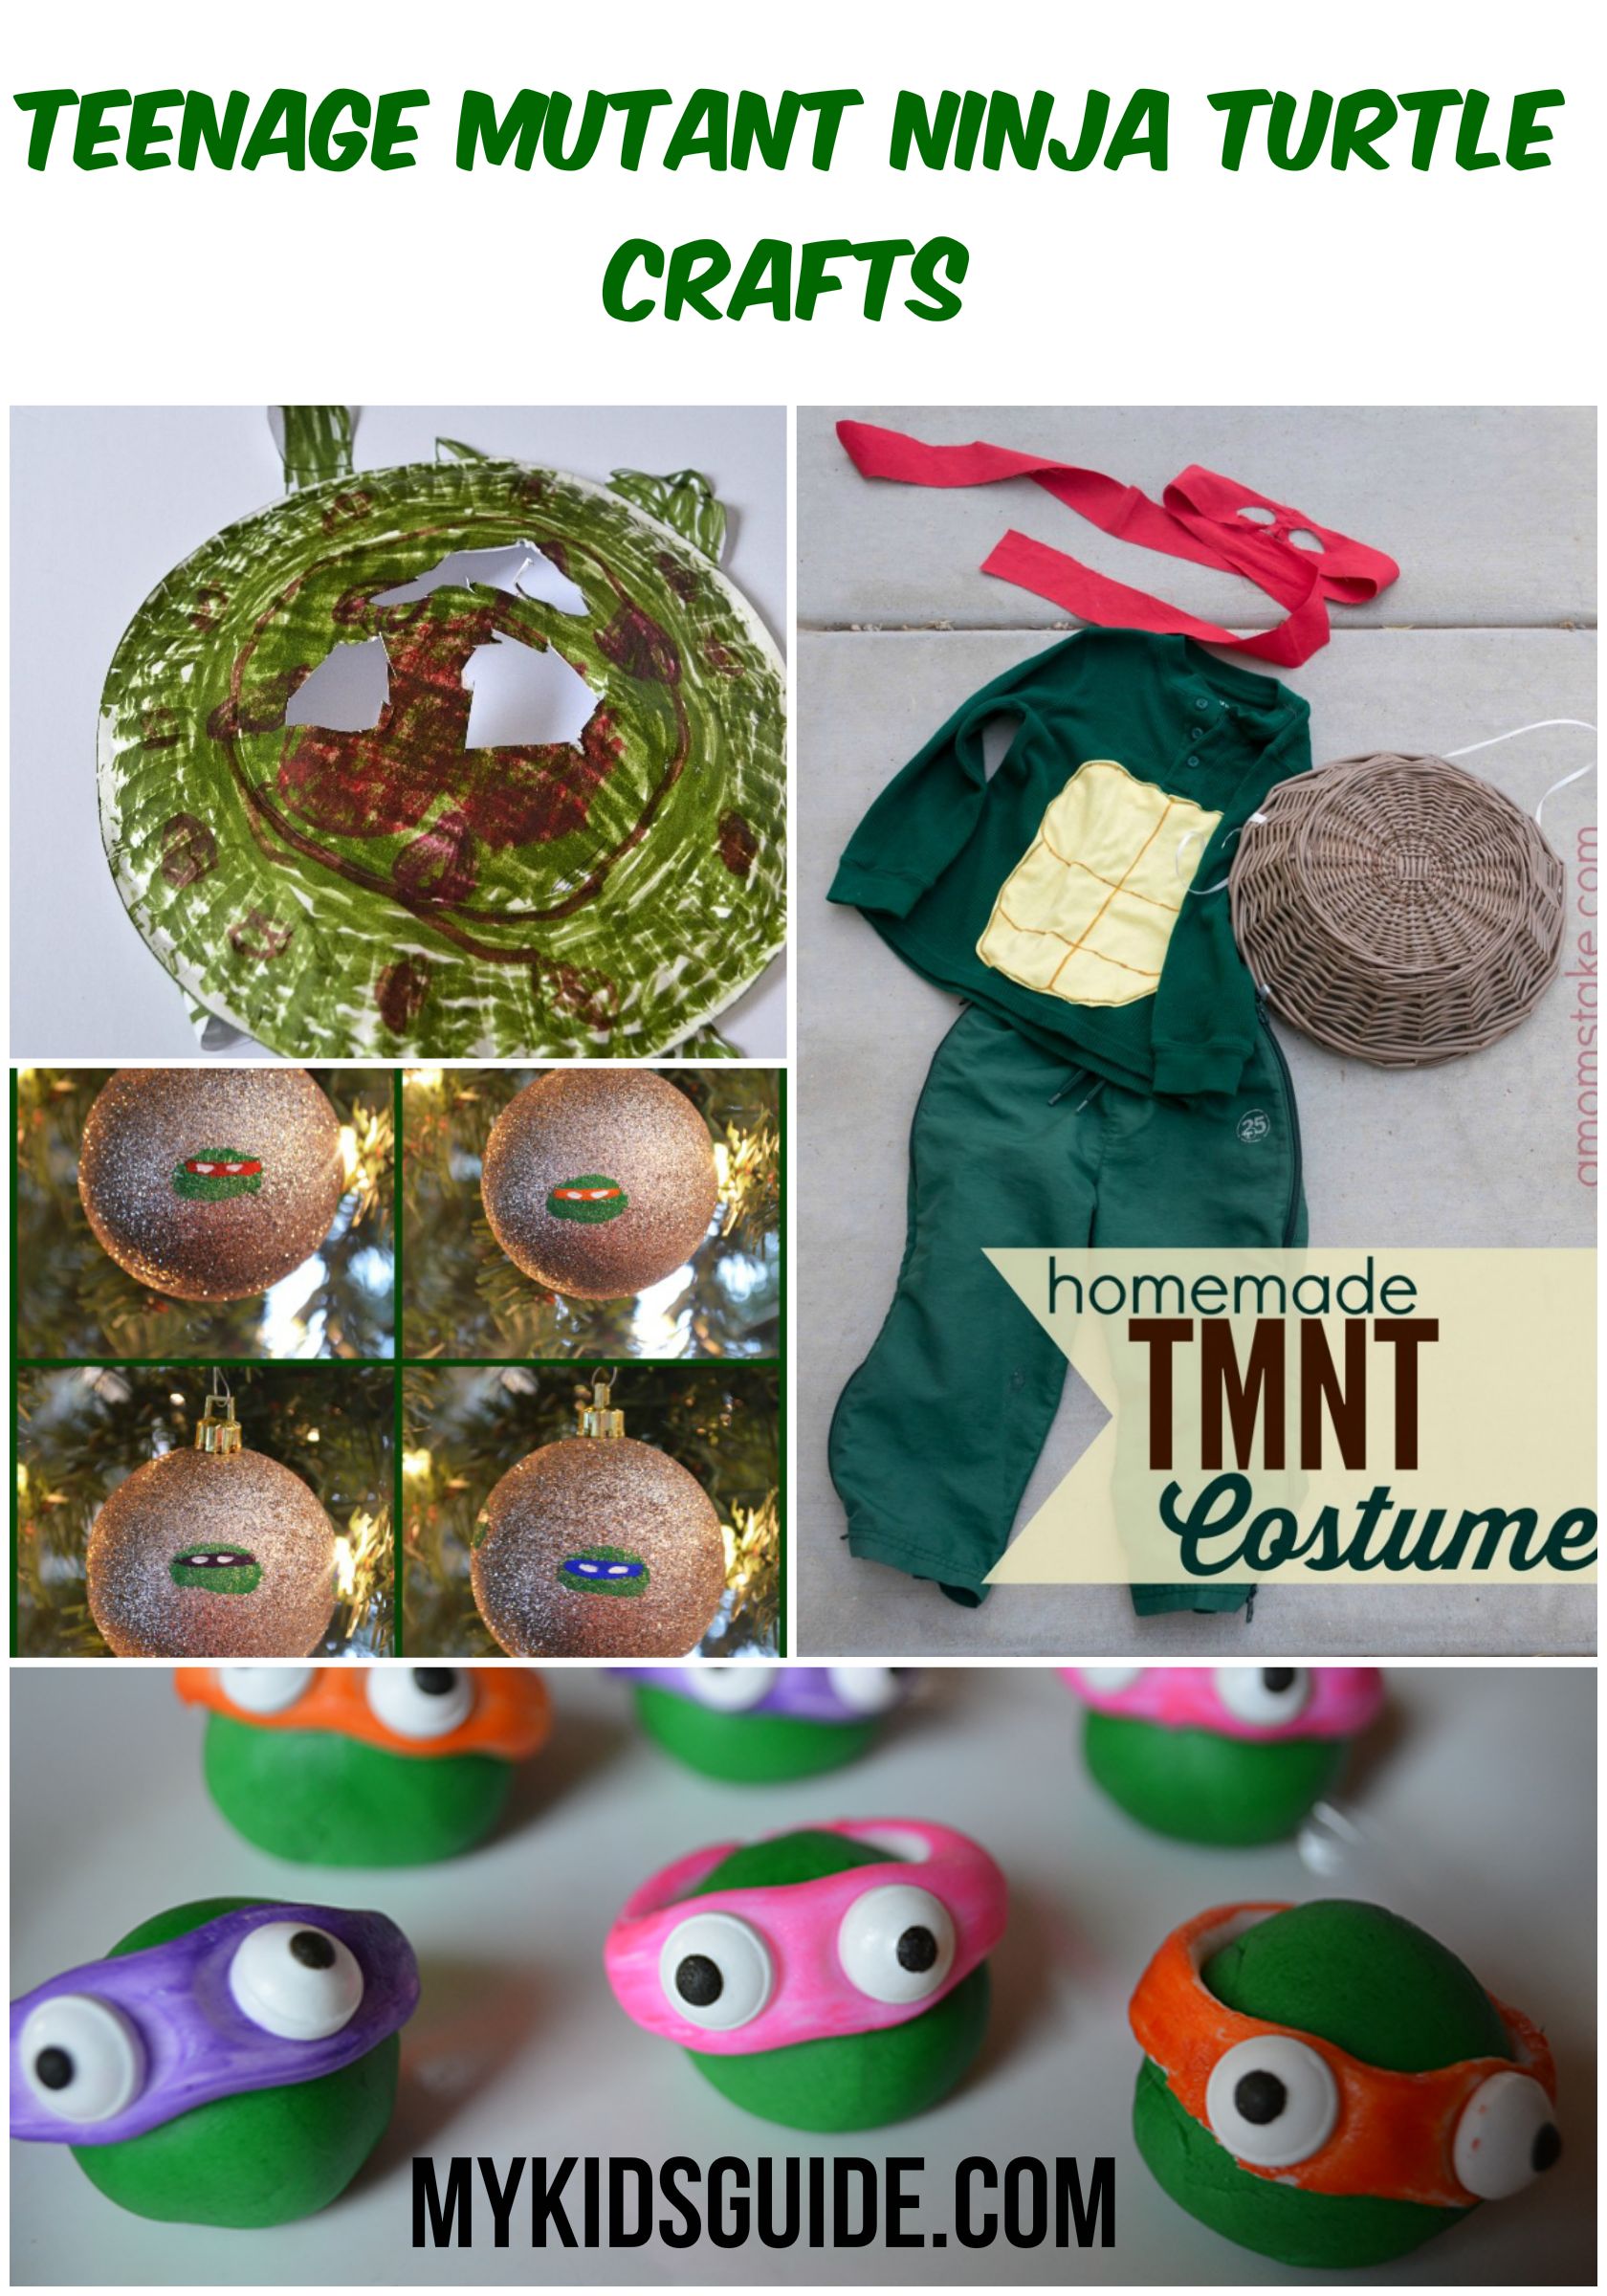 We love the reincarnation of our favorite super heroes the TMNT, and these Great Teenage Mutant Ninja Turtle Crafts are sure to make your new fans happy.